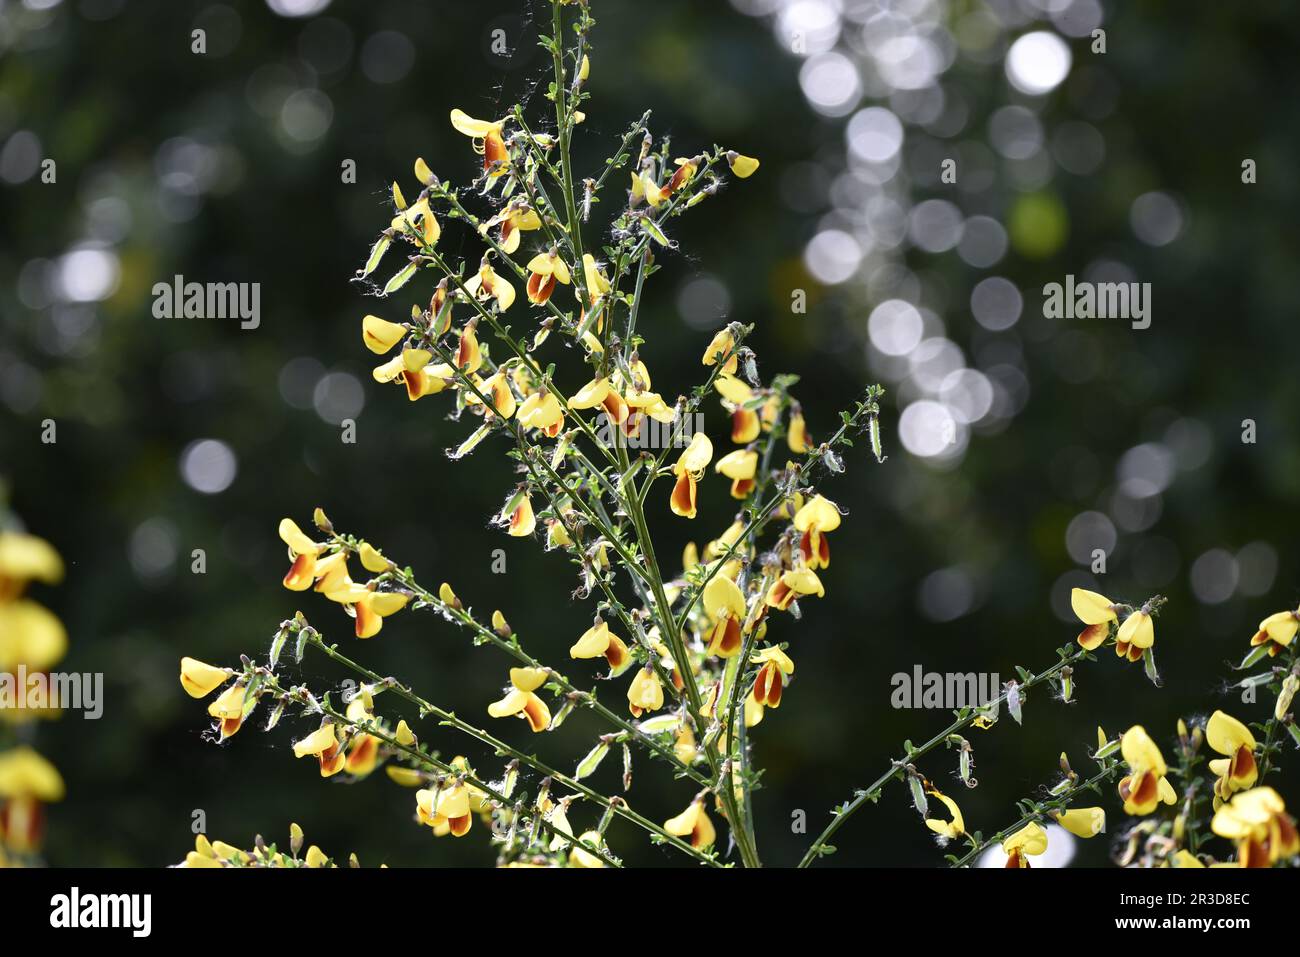 Red and Yellow Flowering Common Broom Shrub (Cytisus scoparius) Backlit by the Sun, against a Green Bokeh Background, taken in the UK in May Stock Photo